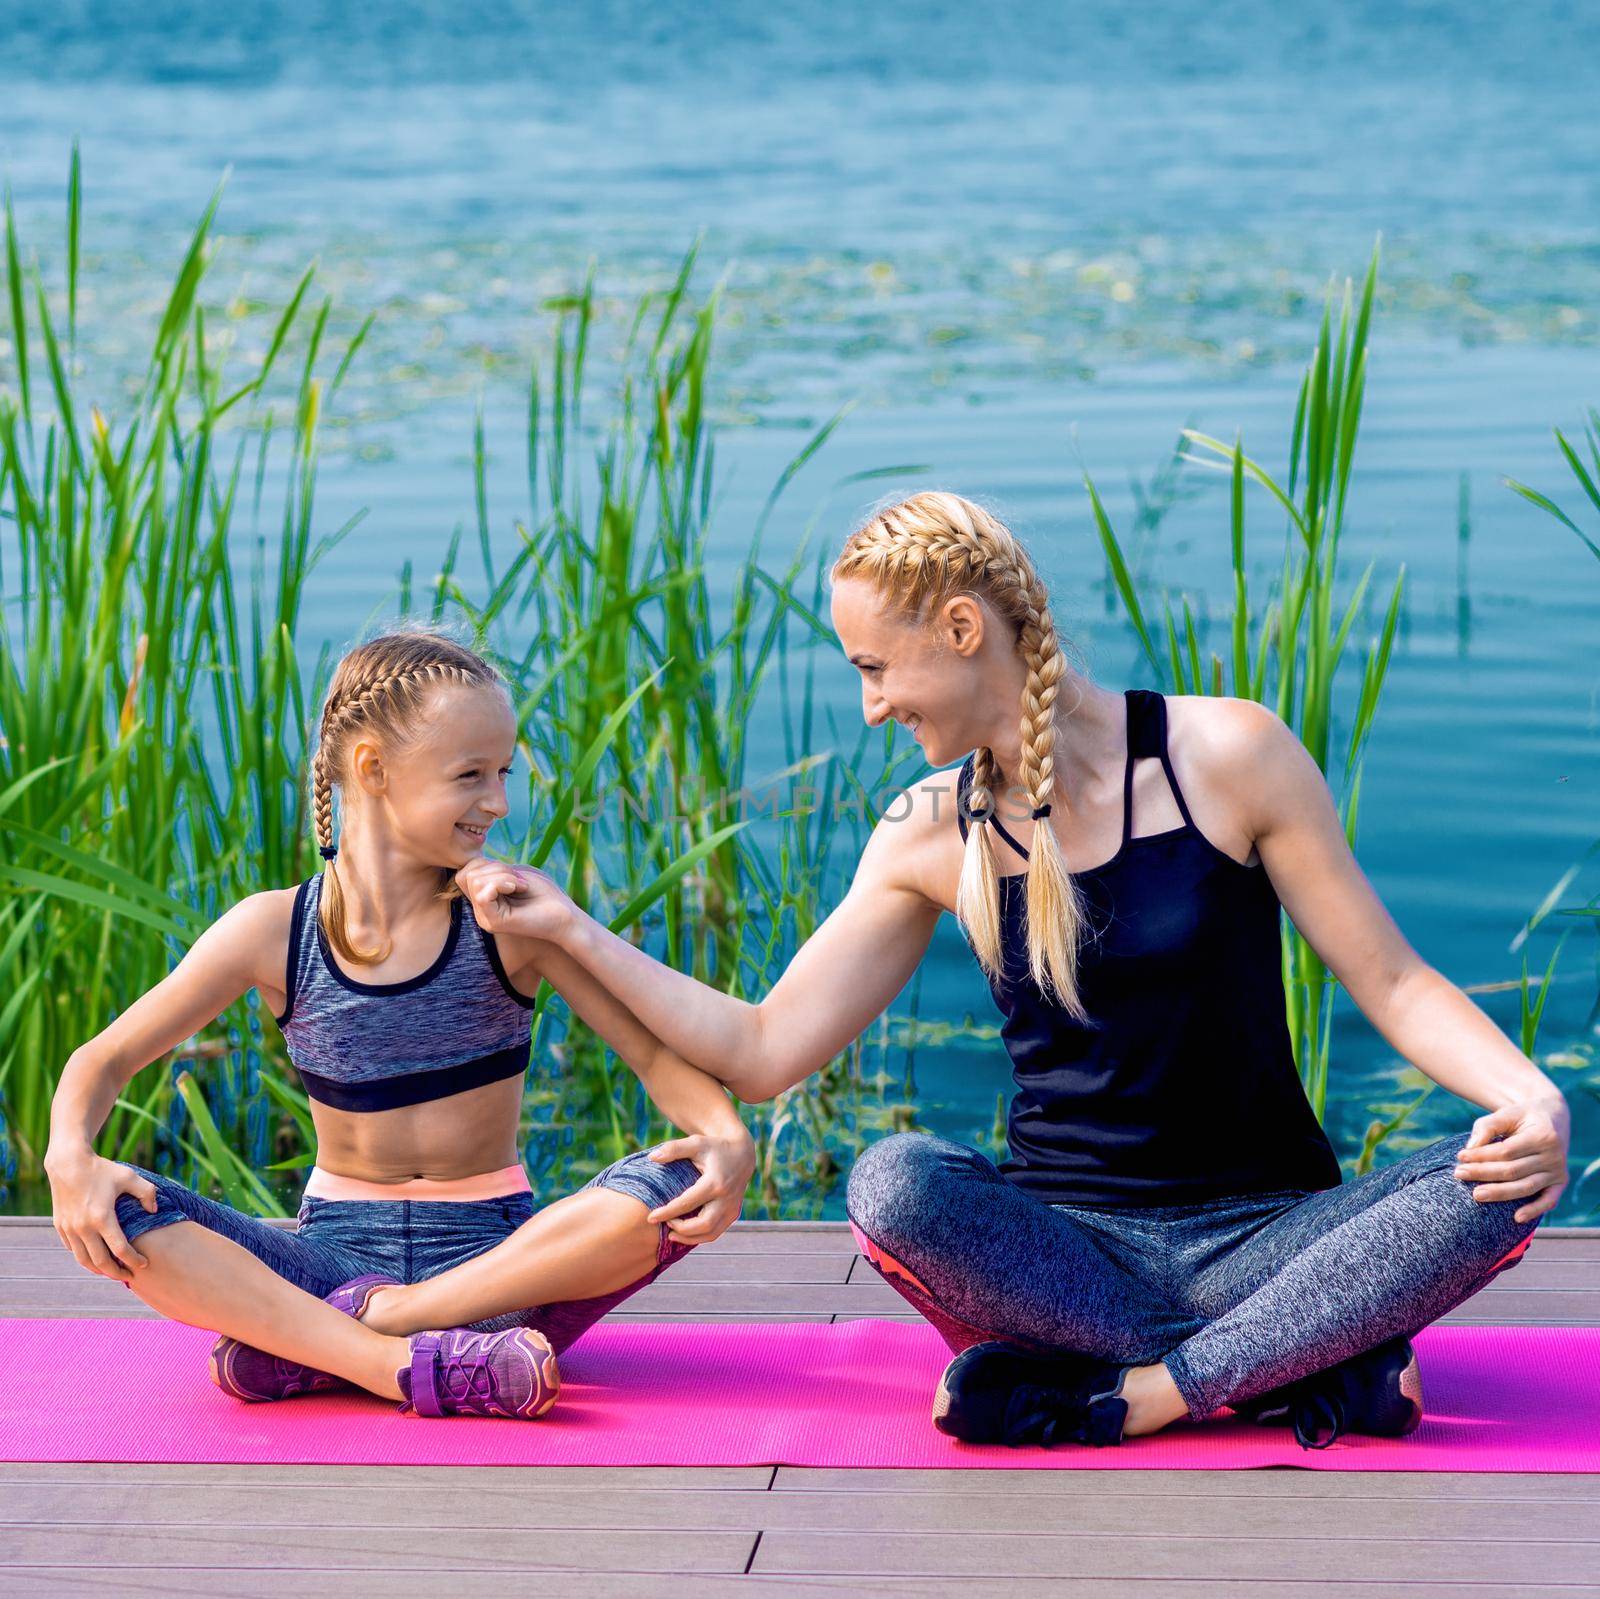 Portrait of mother and daughter sitting on yoga mat by the lake outdoors. Healthy and exercise concept.